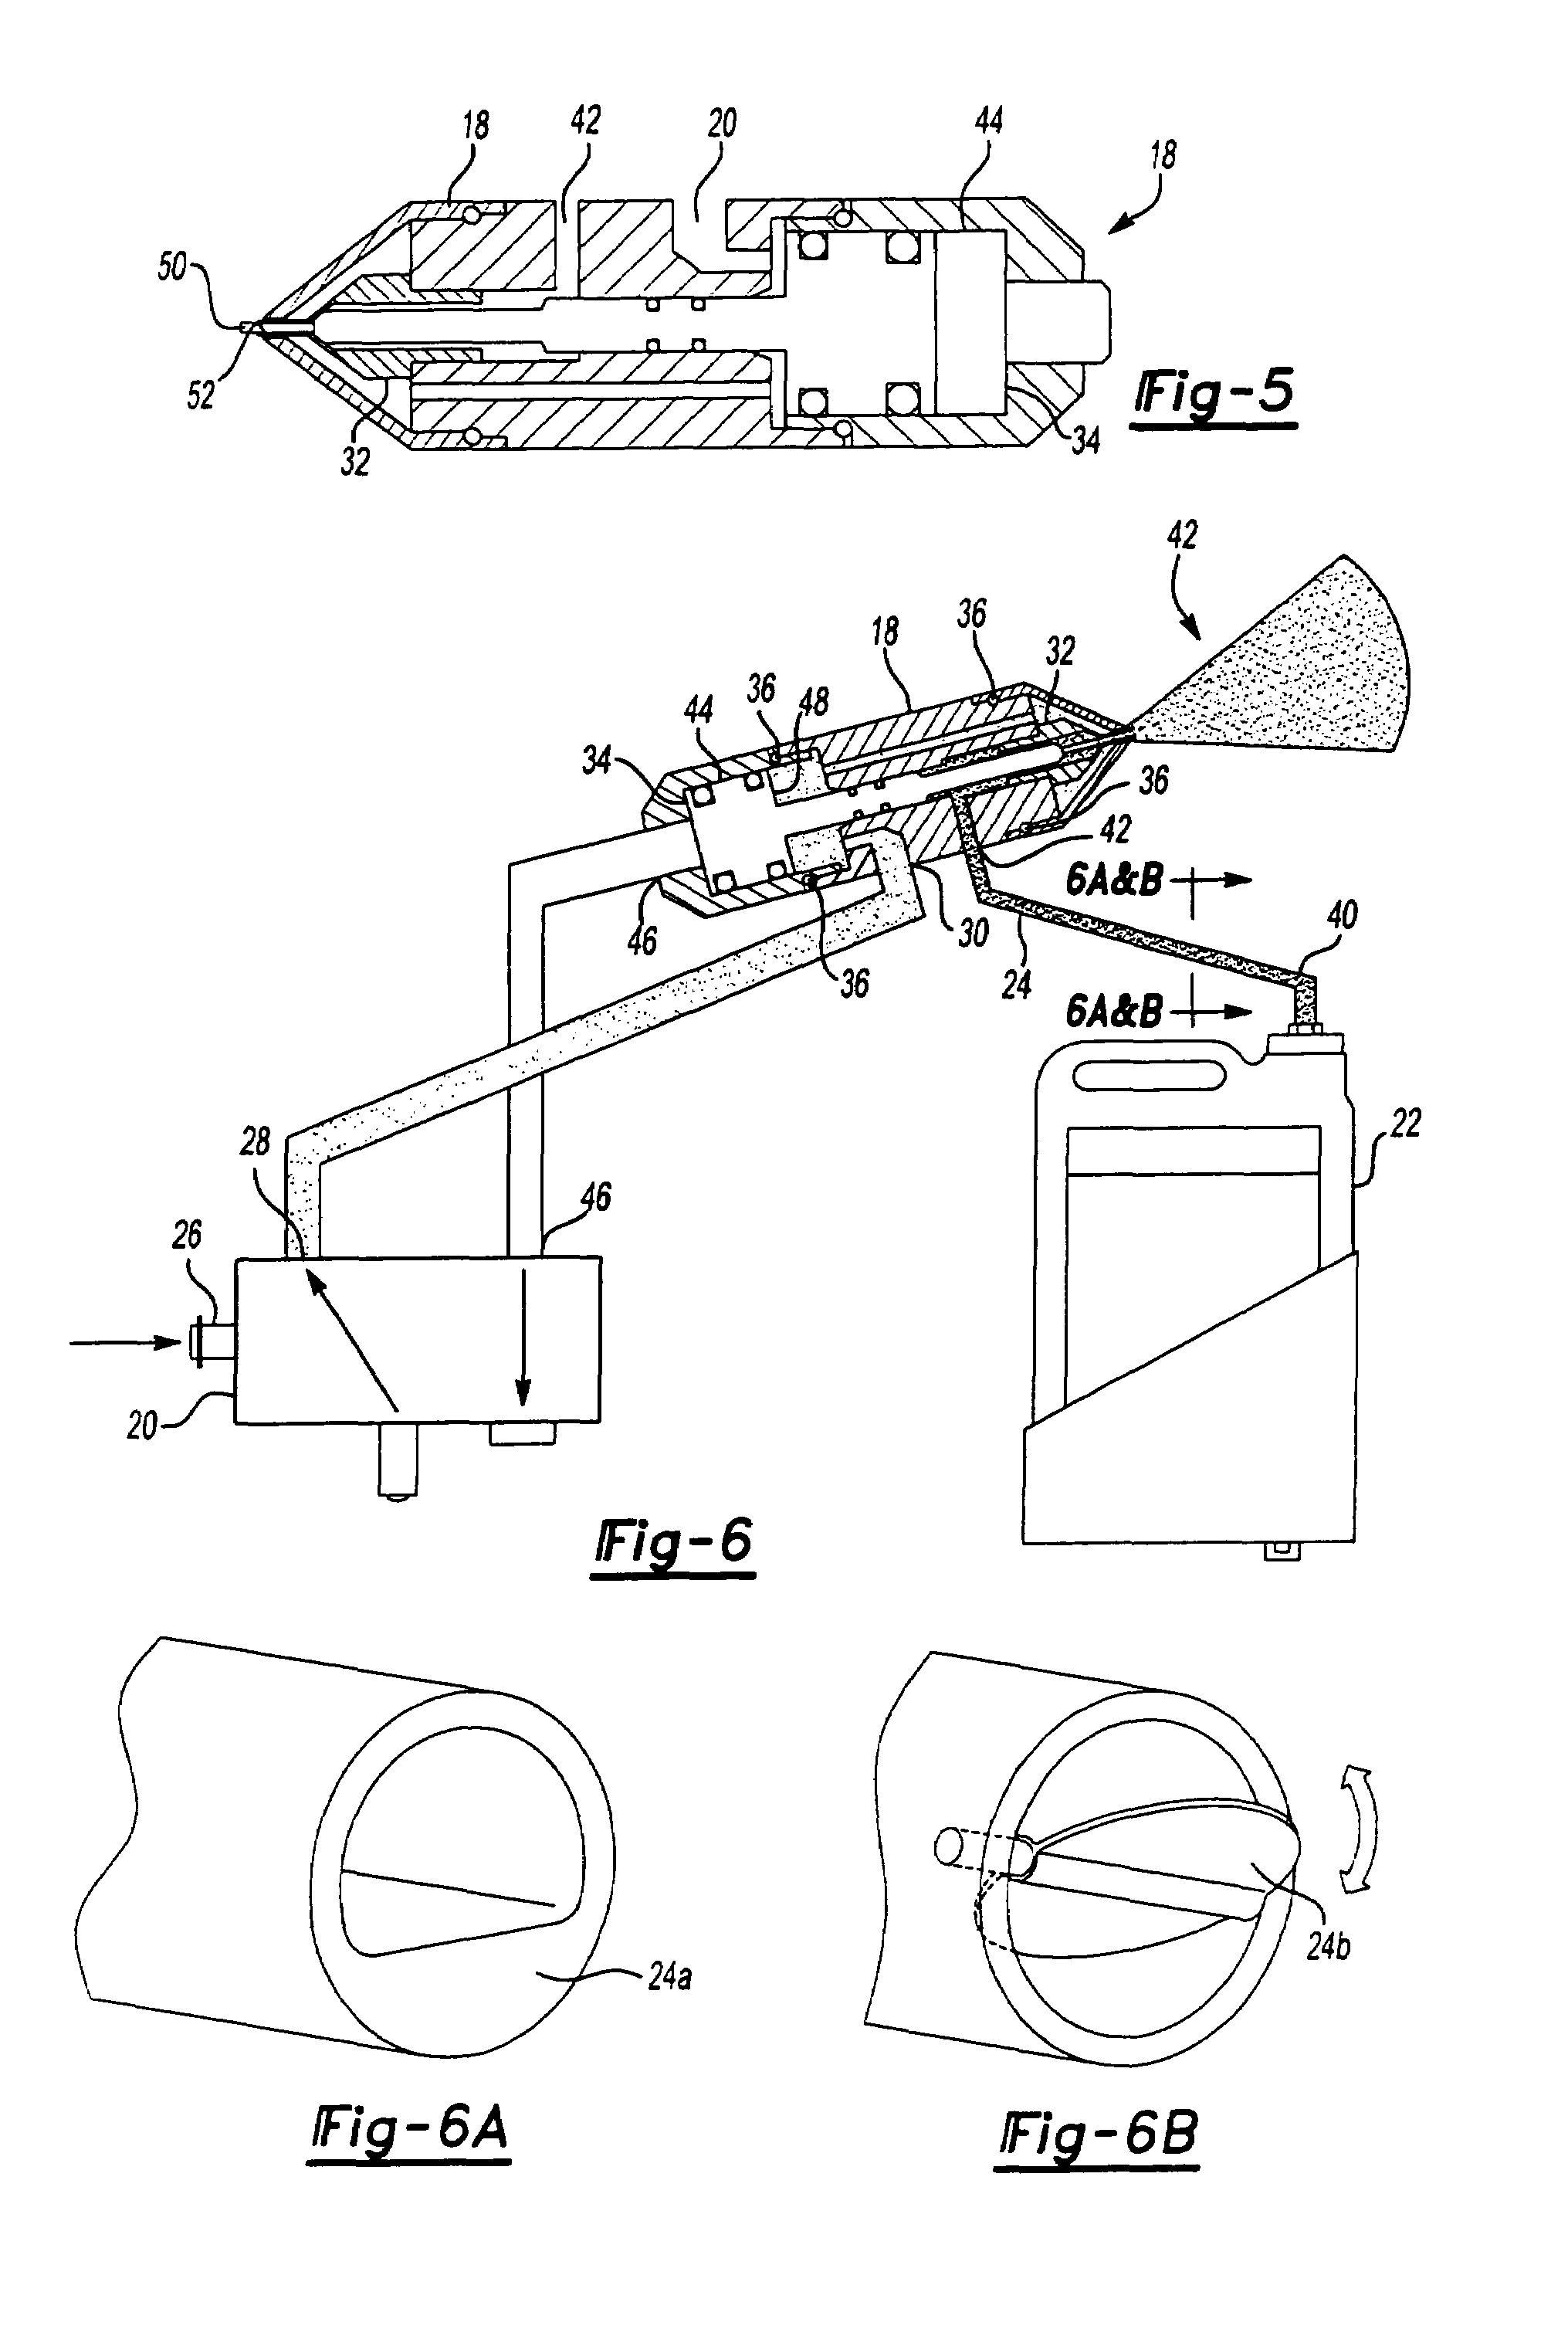 Spraying device system and method of dispersing and disseminating materials